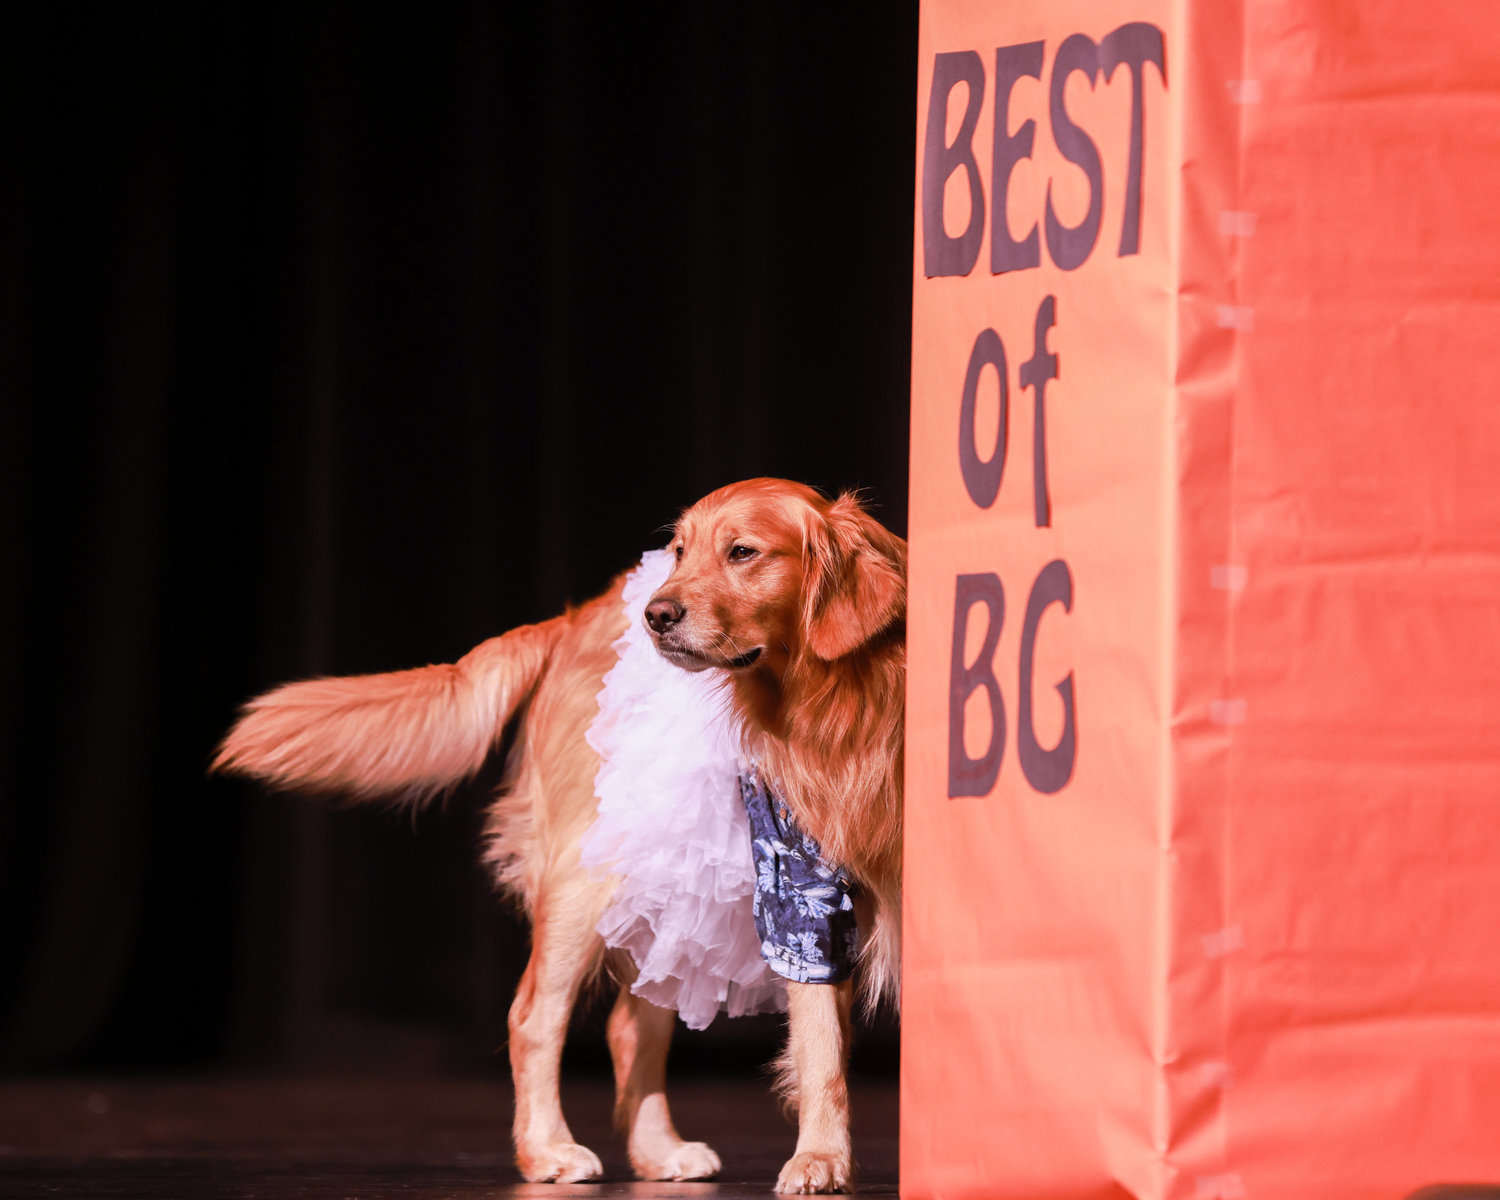 Contestant Morgan Nixon brought her dog to the beach wear portion of the Best of BG event at Battle Ground High School on Saturday, March 25.